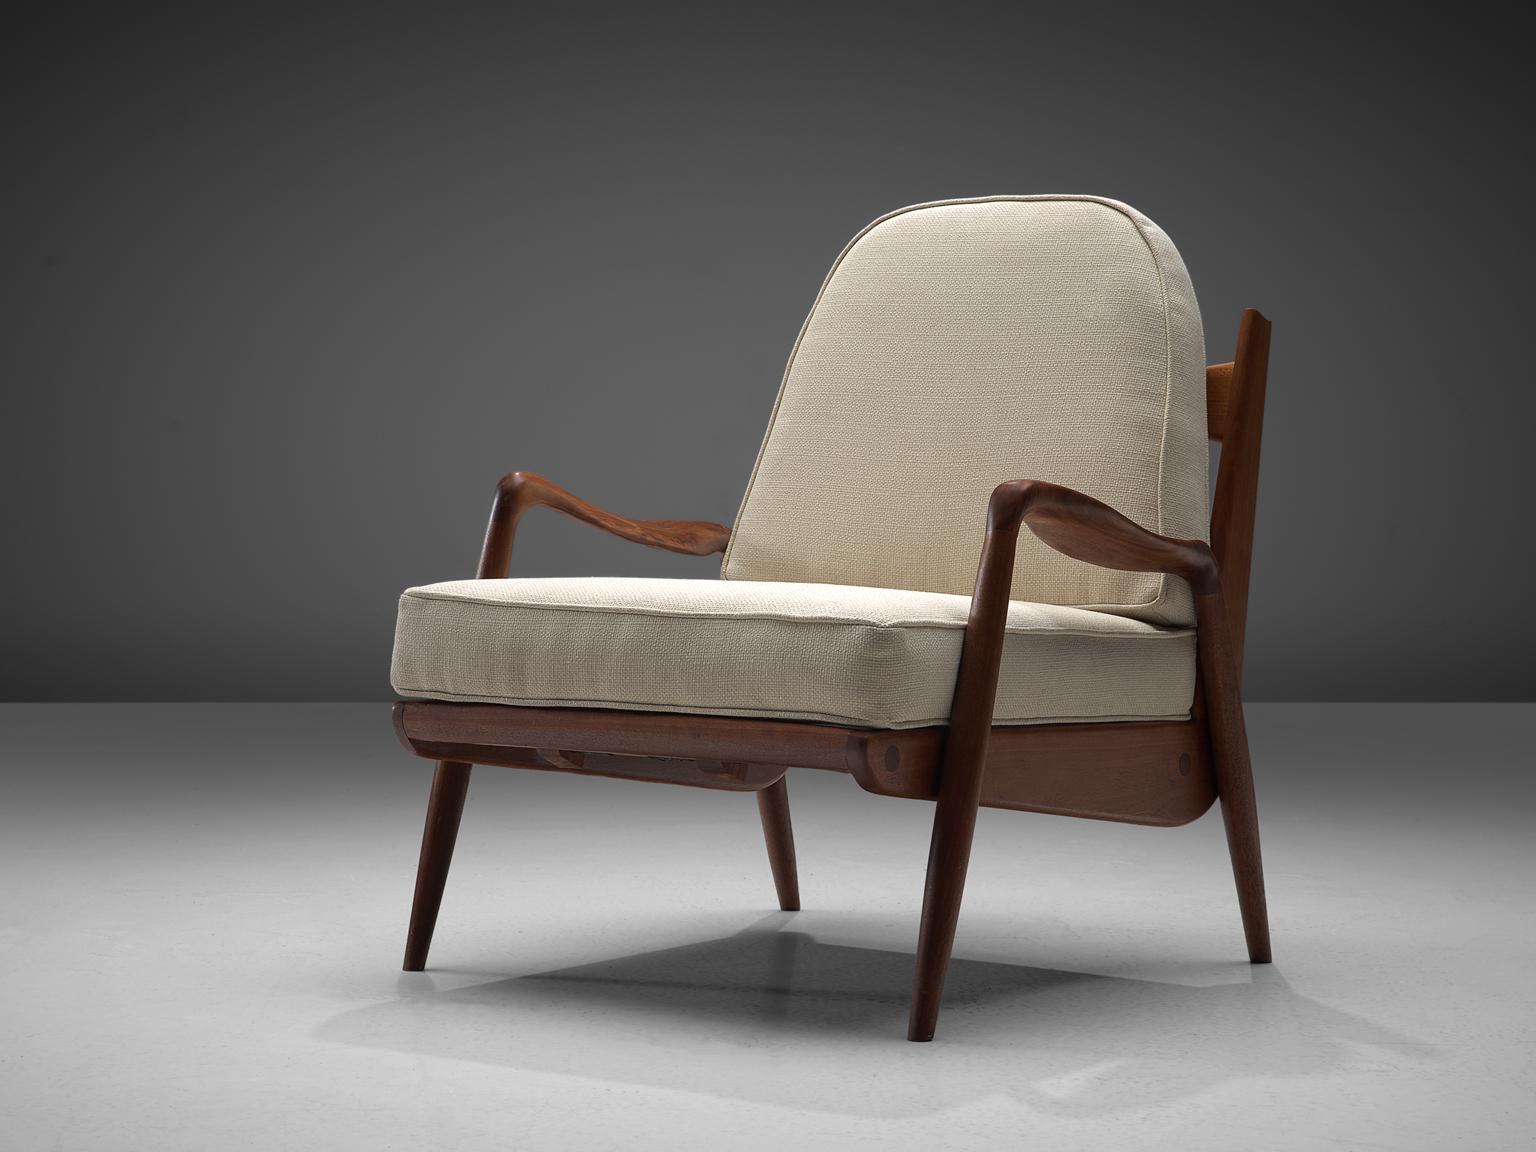 Philip Lloyd Powell, 'New Hope' lounge chair, American walnut and white fabric upholstery, United States, 1960s.

This comfortable armchair made out of American walnut and fabric upholstery is designed by Philip Lloyd Powell. The name 'New Hope'